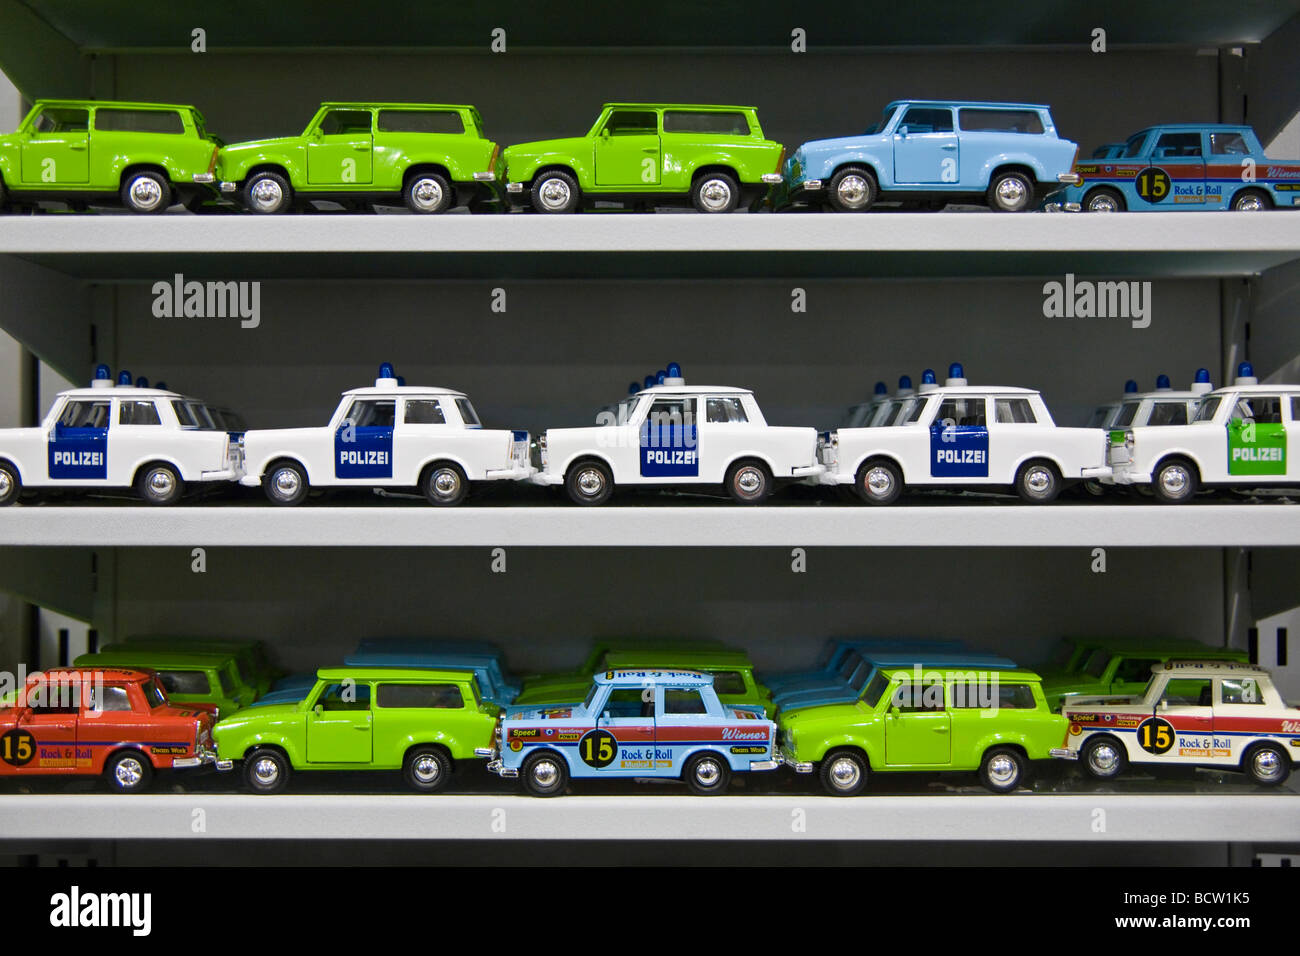 Many miniature Trabant cars, Trabi toy cars including racing cars and police cars on a shelf Stock Photo